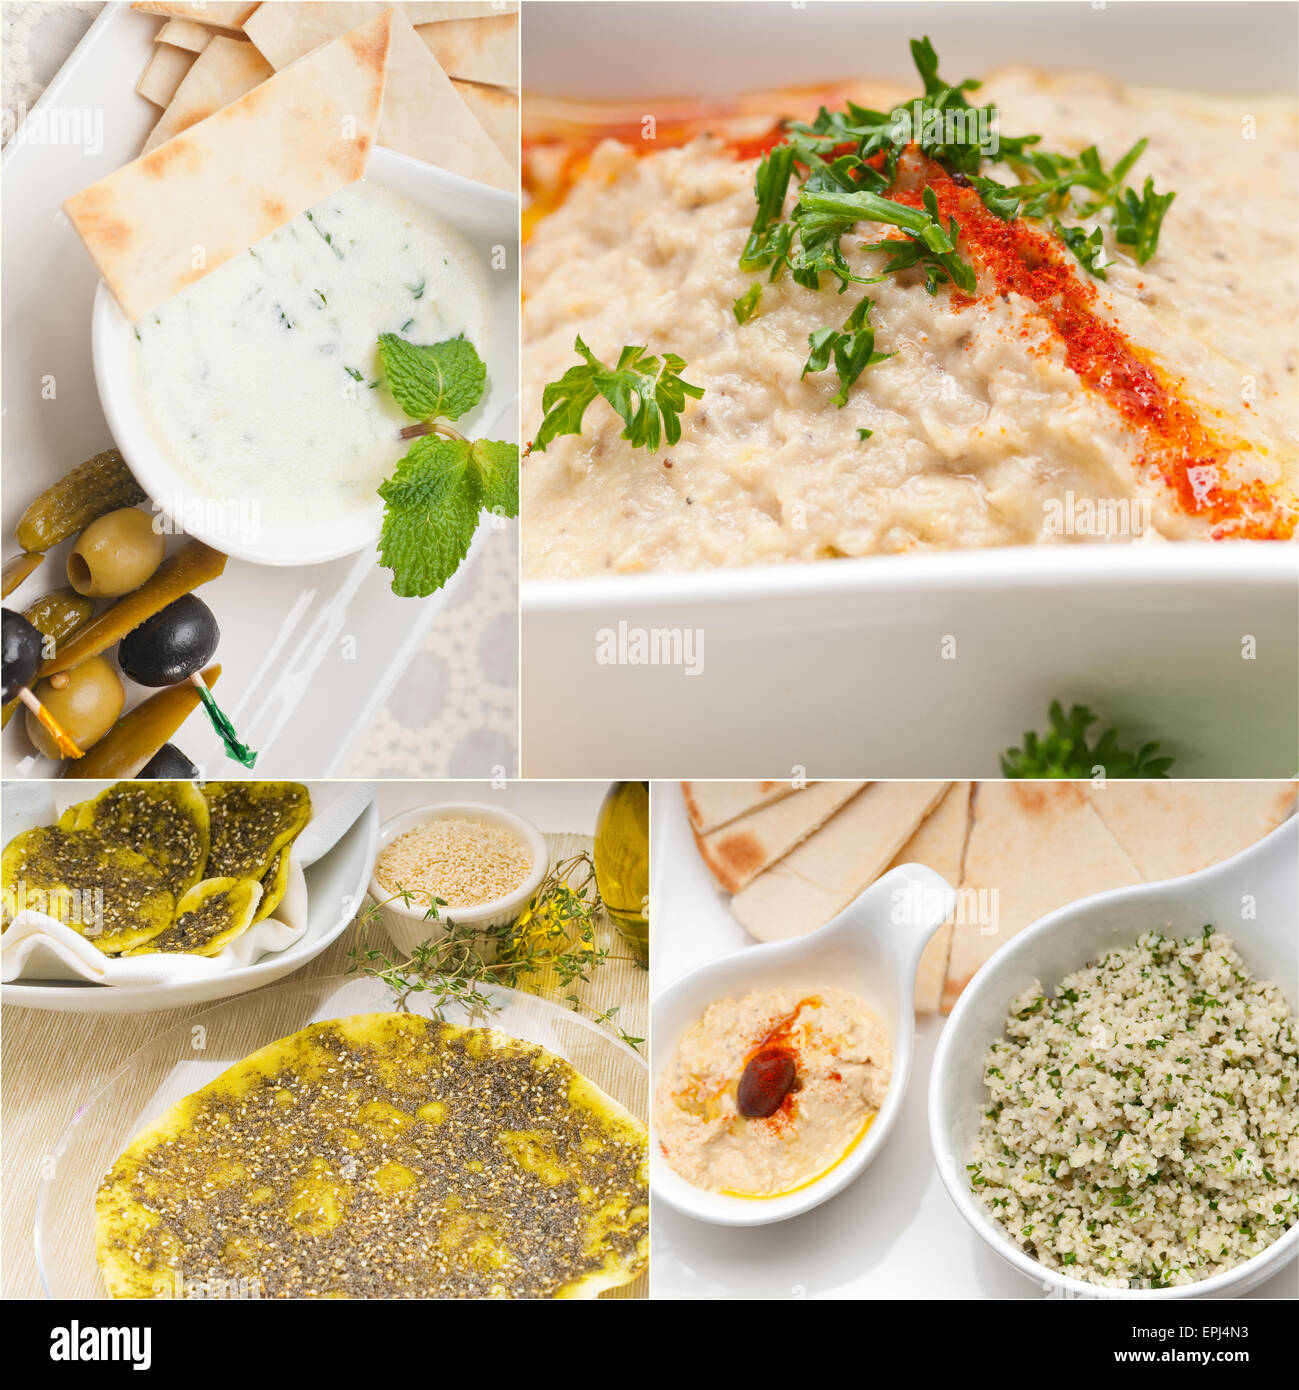 Arab middle eastern food collage Stock Photo